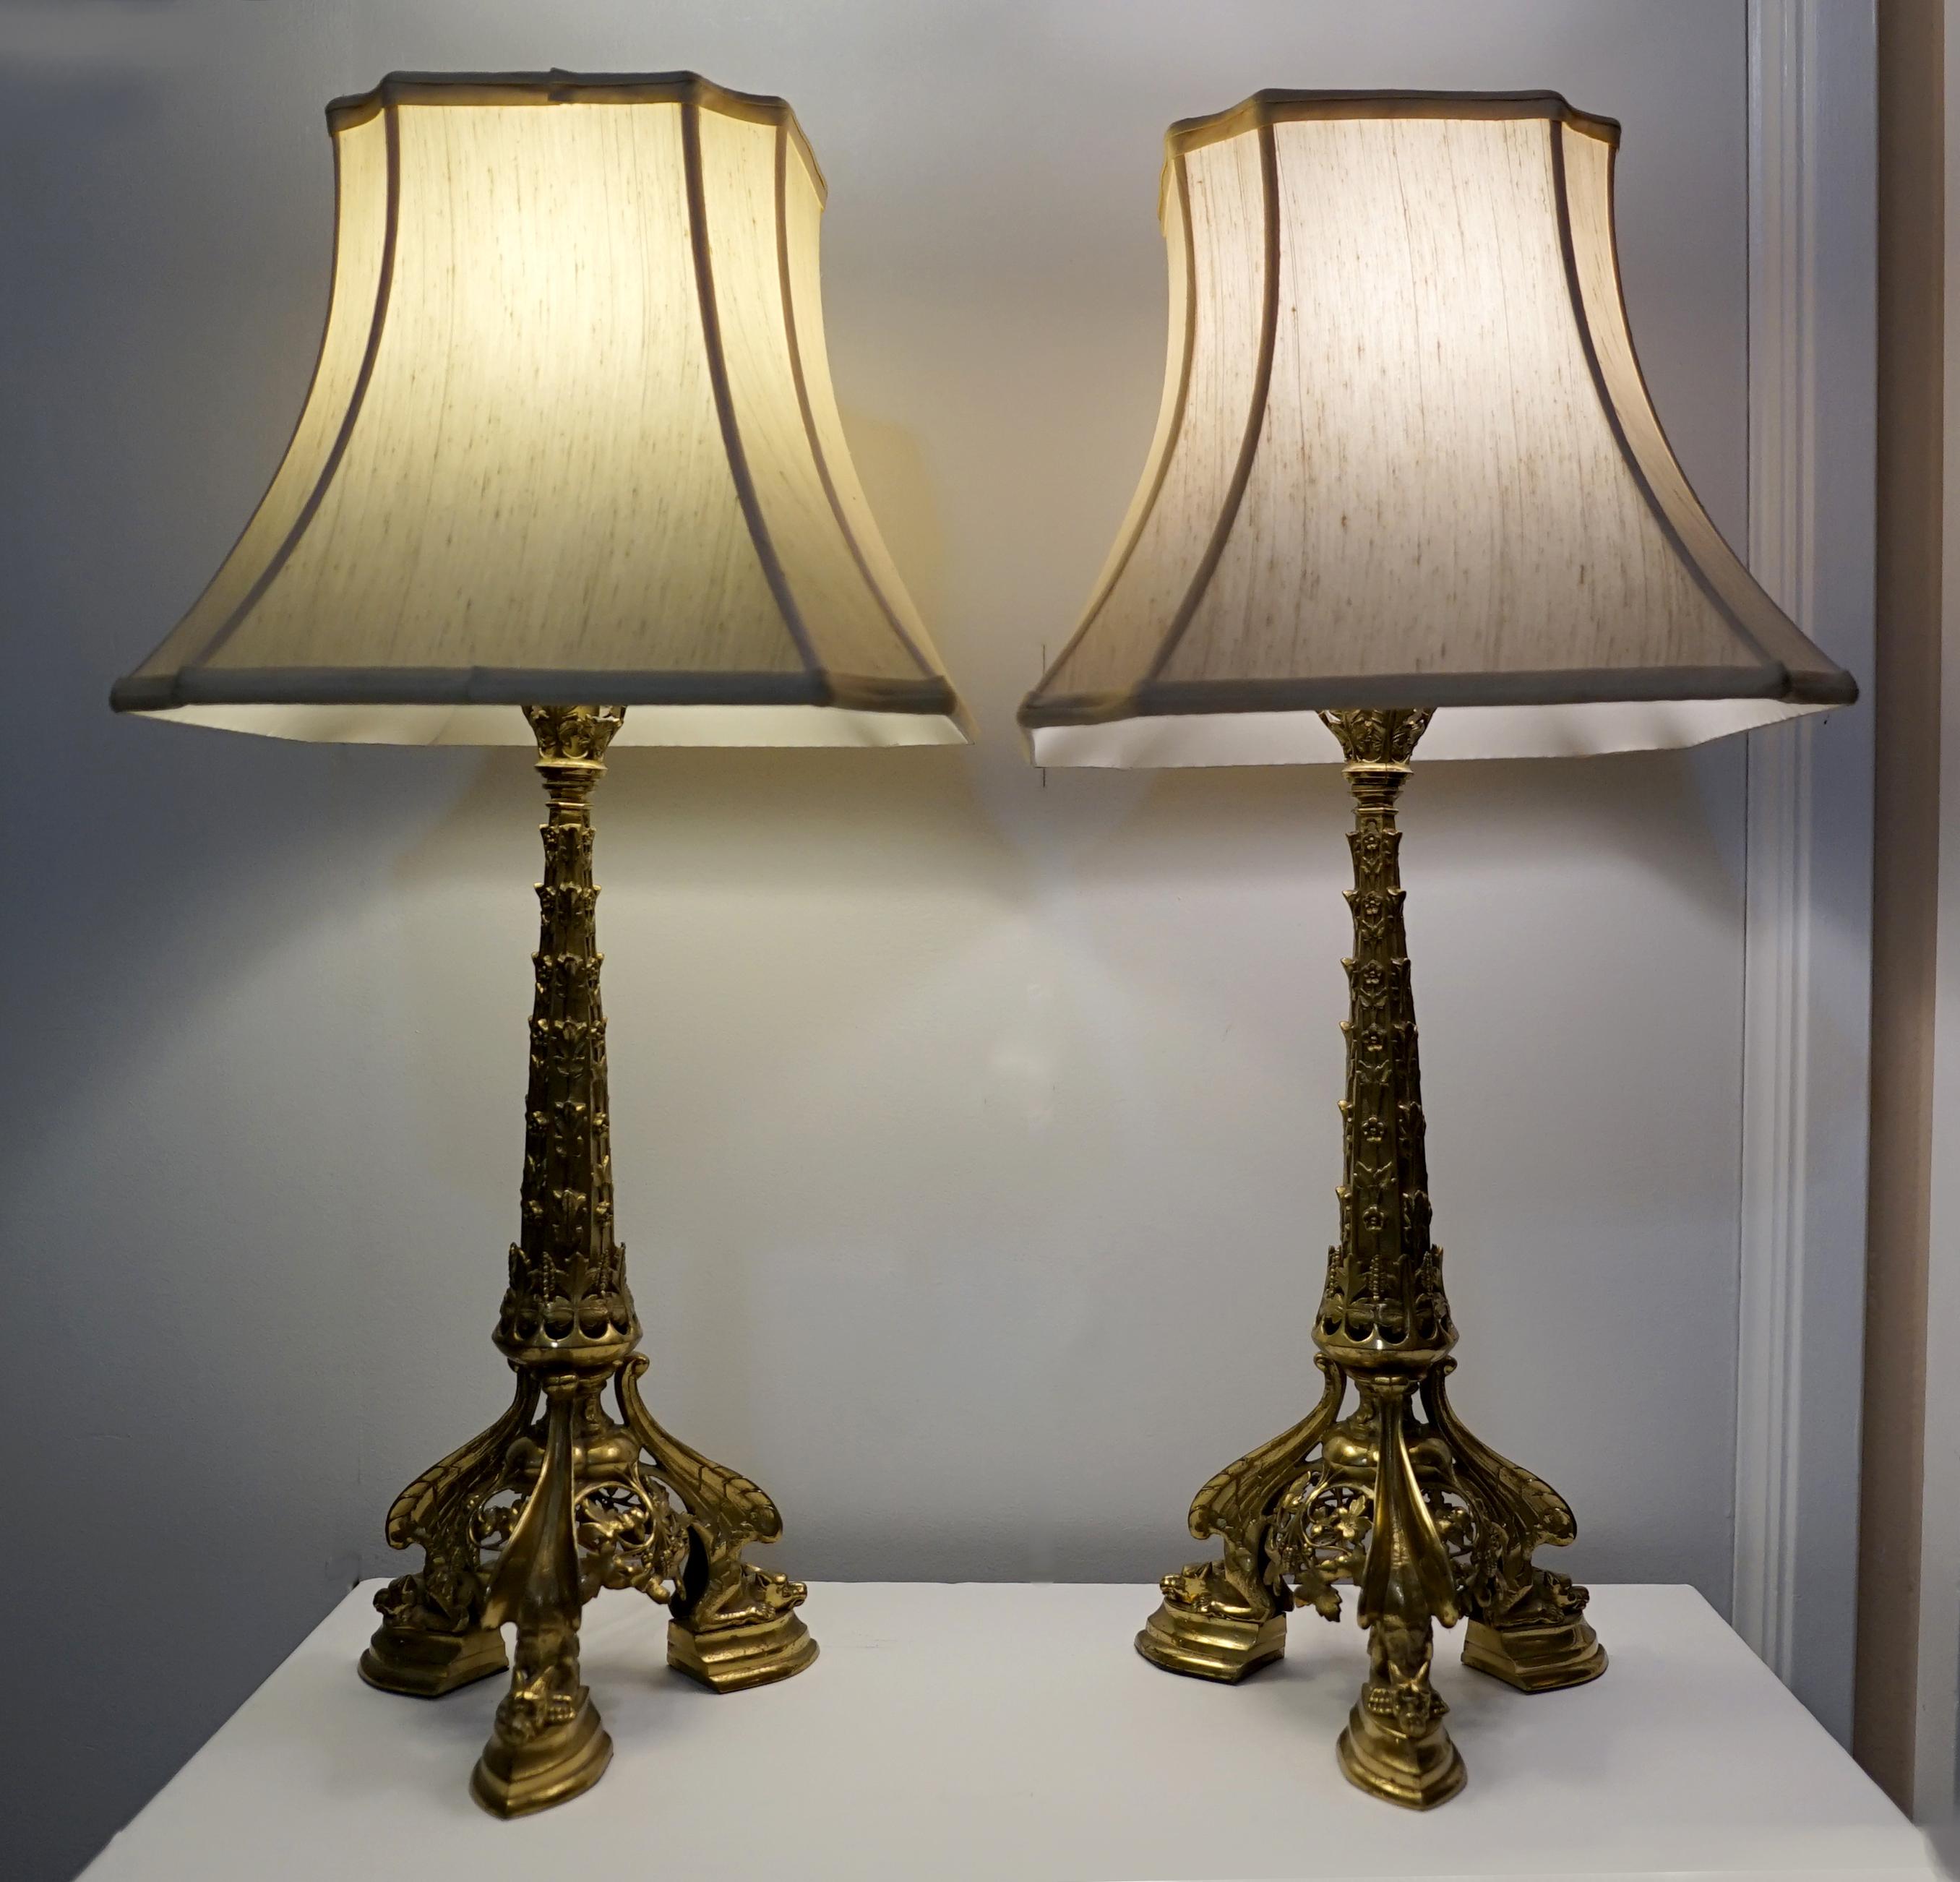 Gold and gargoyles combine to create an elegant lighting opportunity in this pair of lamps made in Canada. The French Rococo influence is apparent in the gilded cast design and the tower silhouette with intricate bronze gilt work. Perhaps most